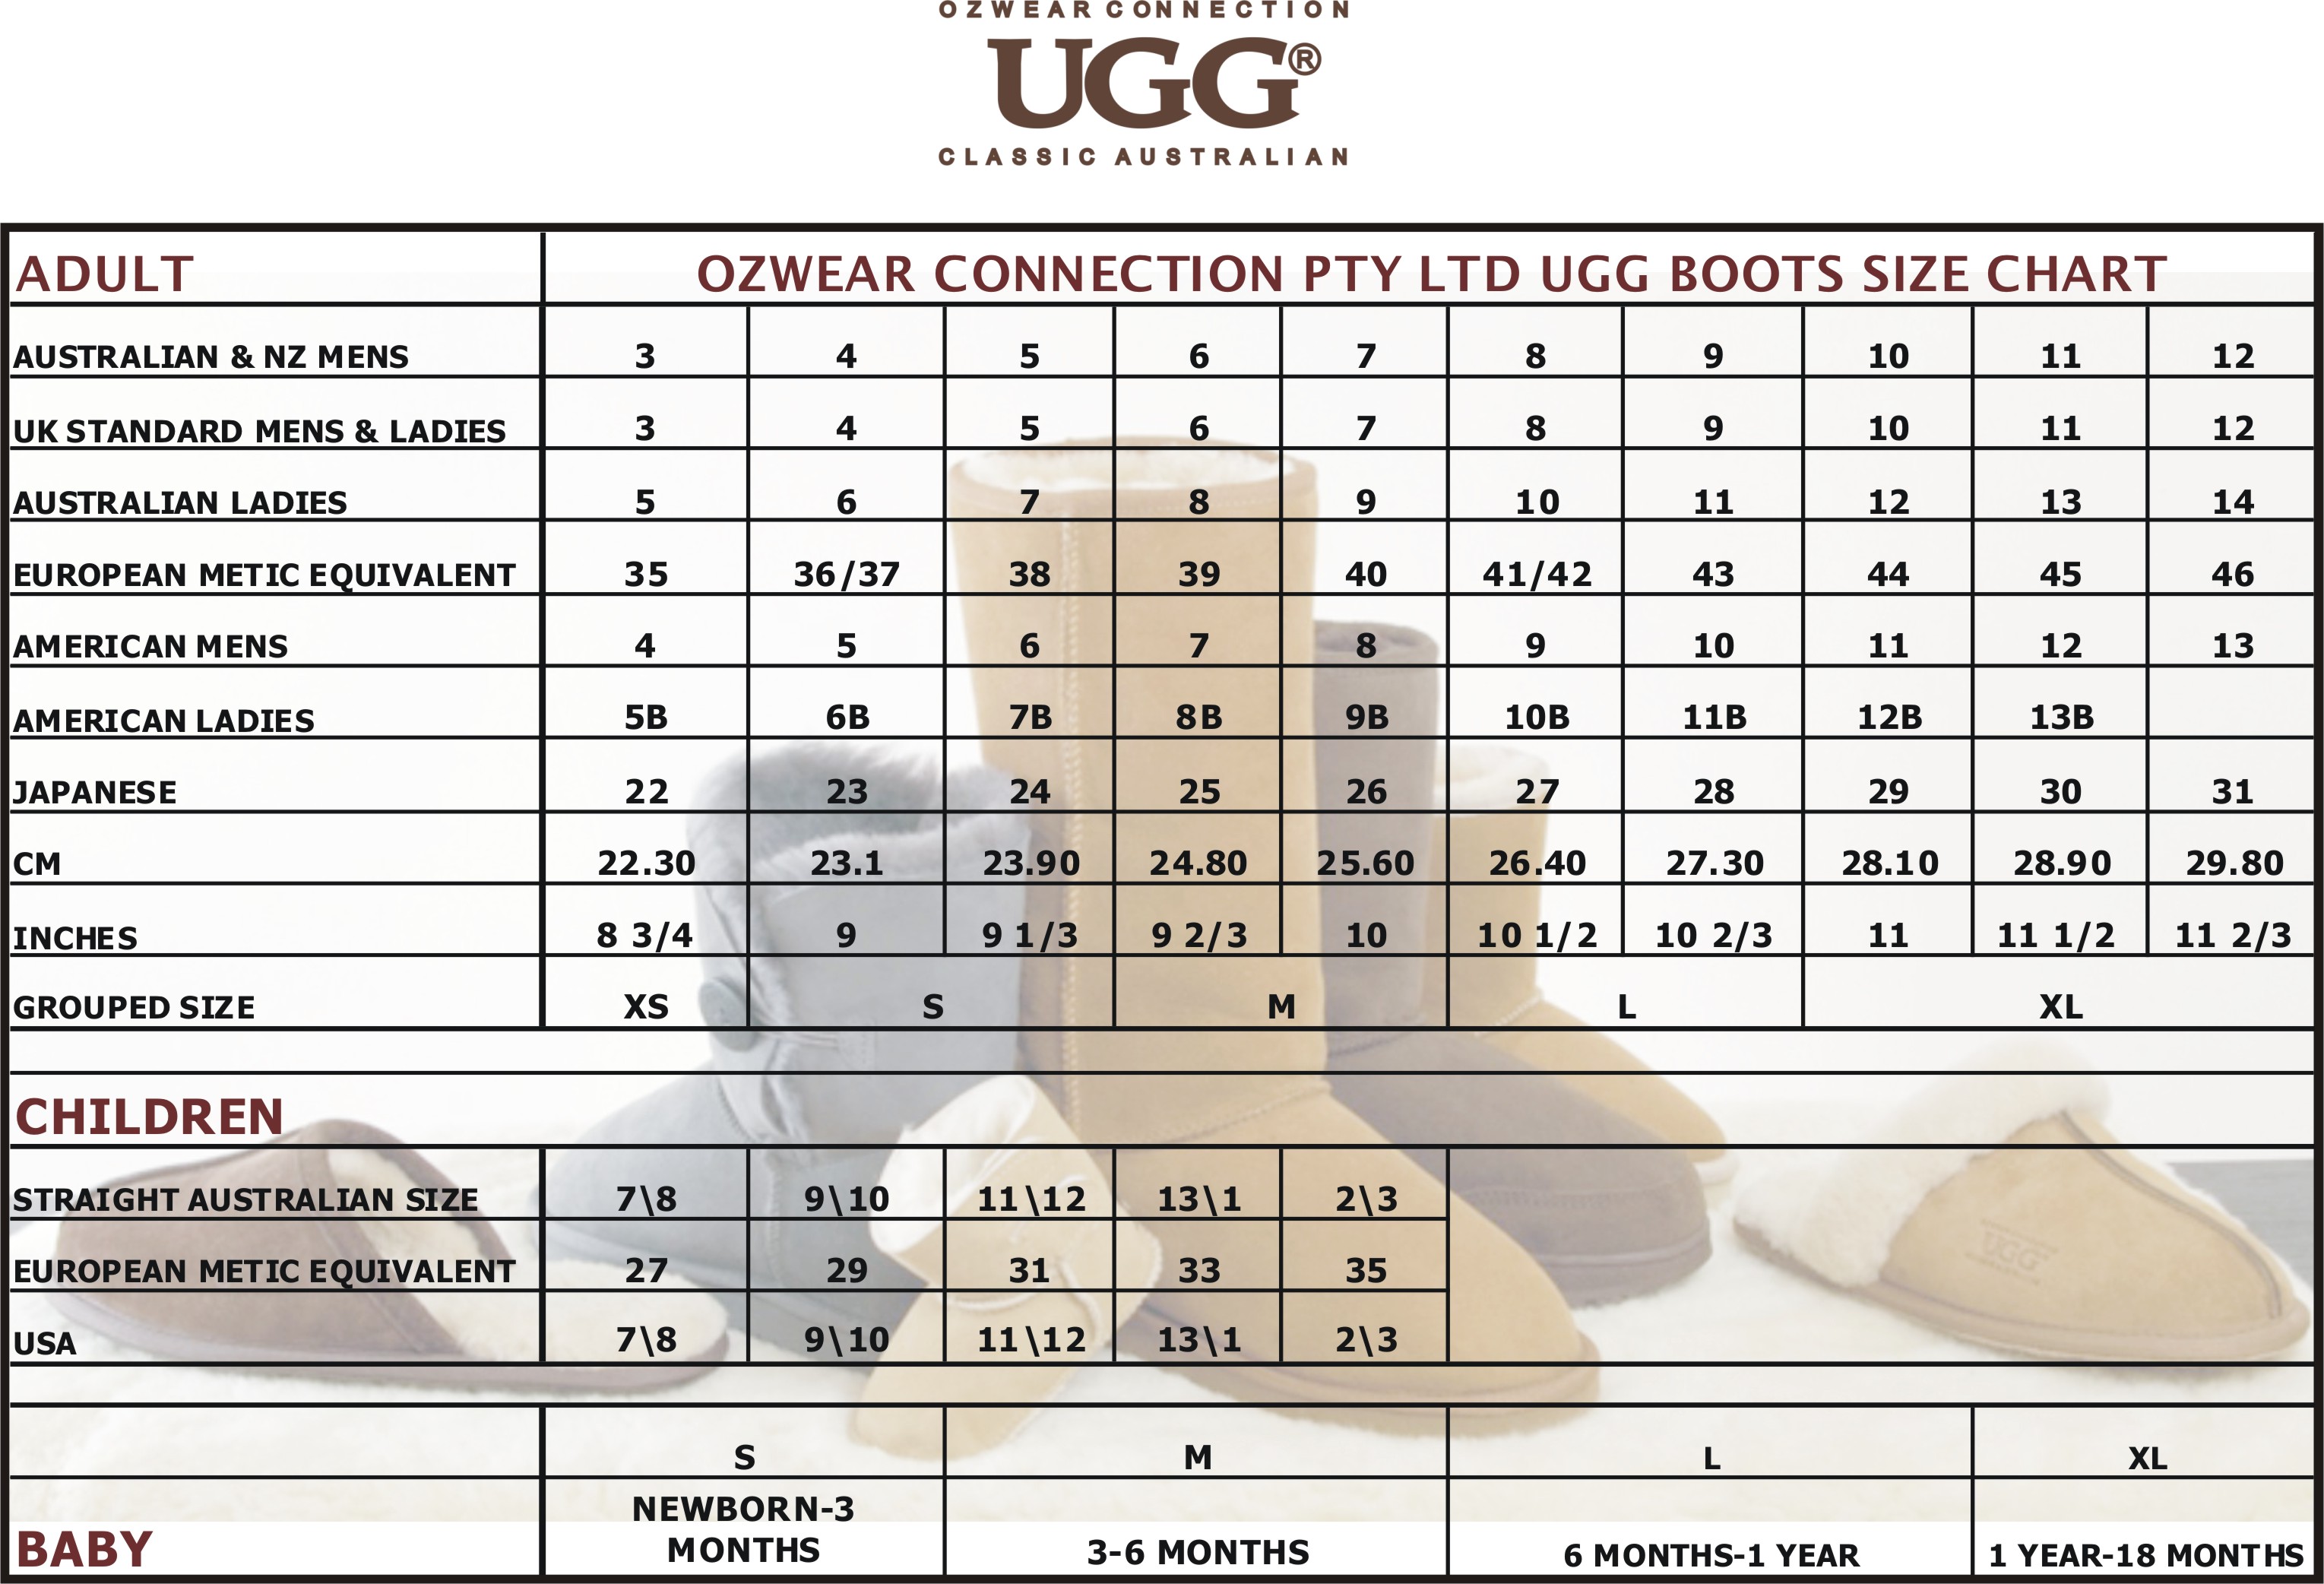 uggs size guide